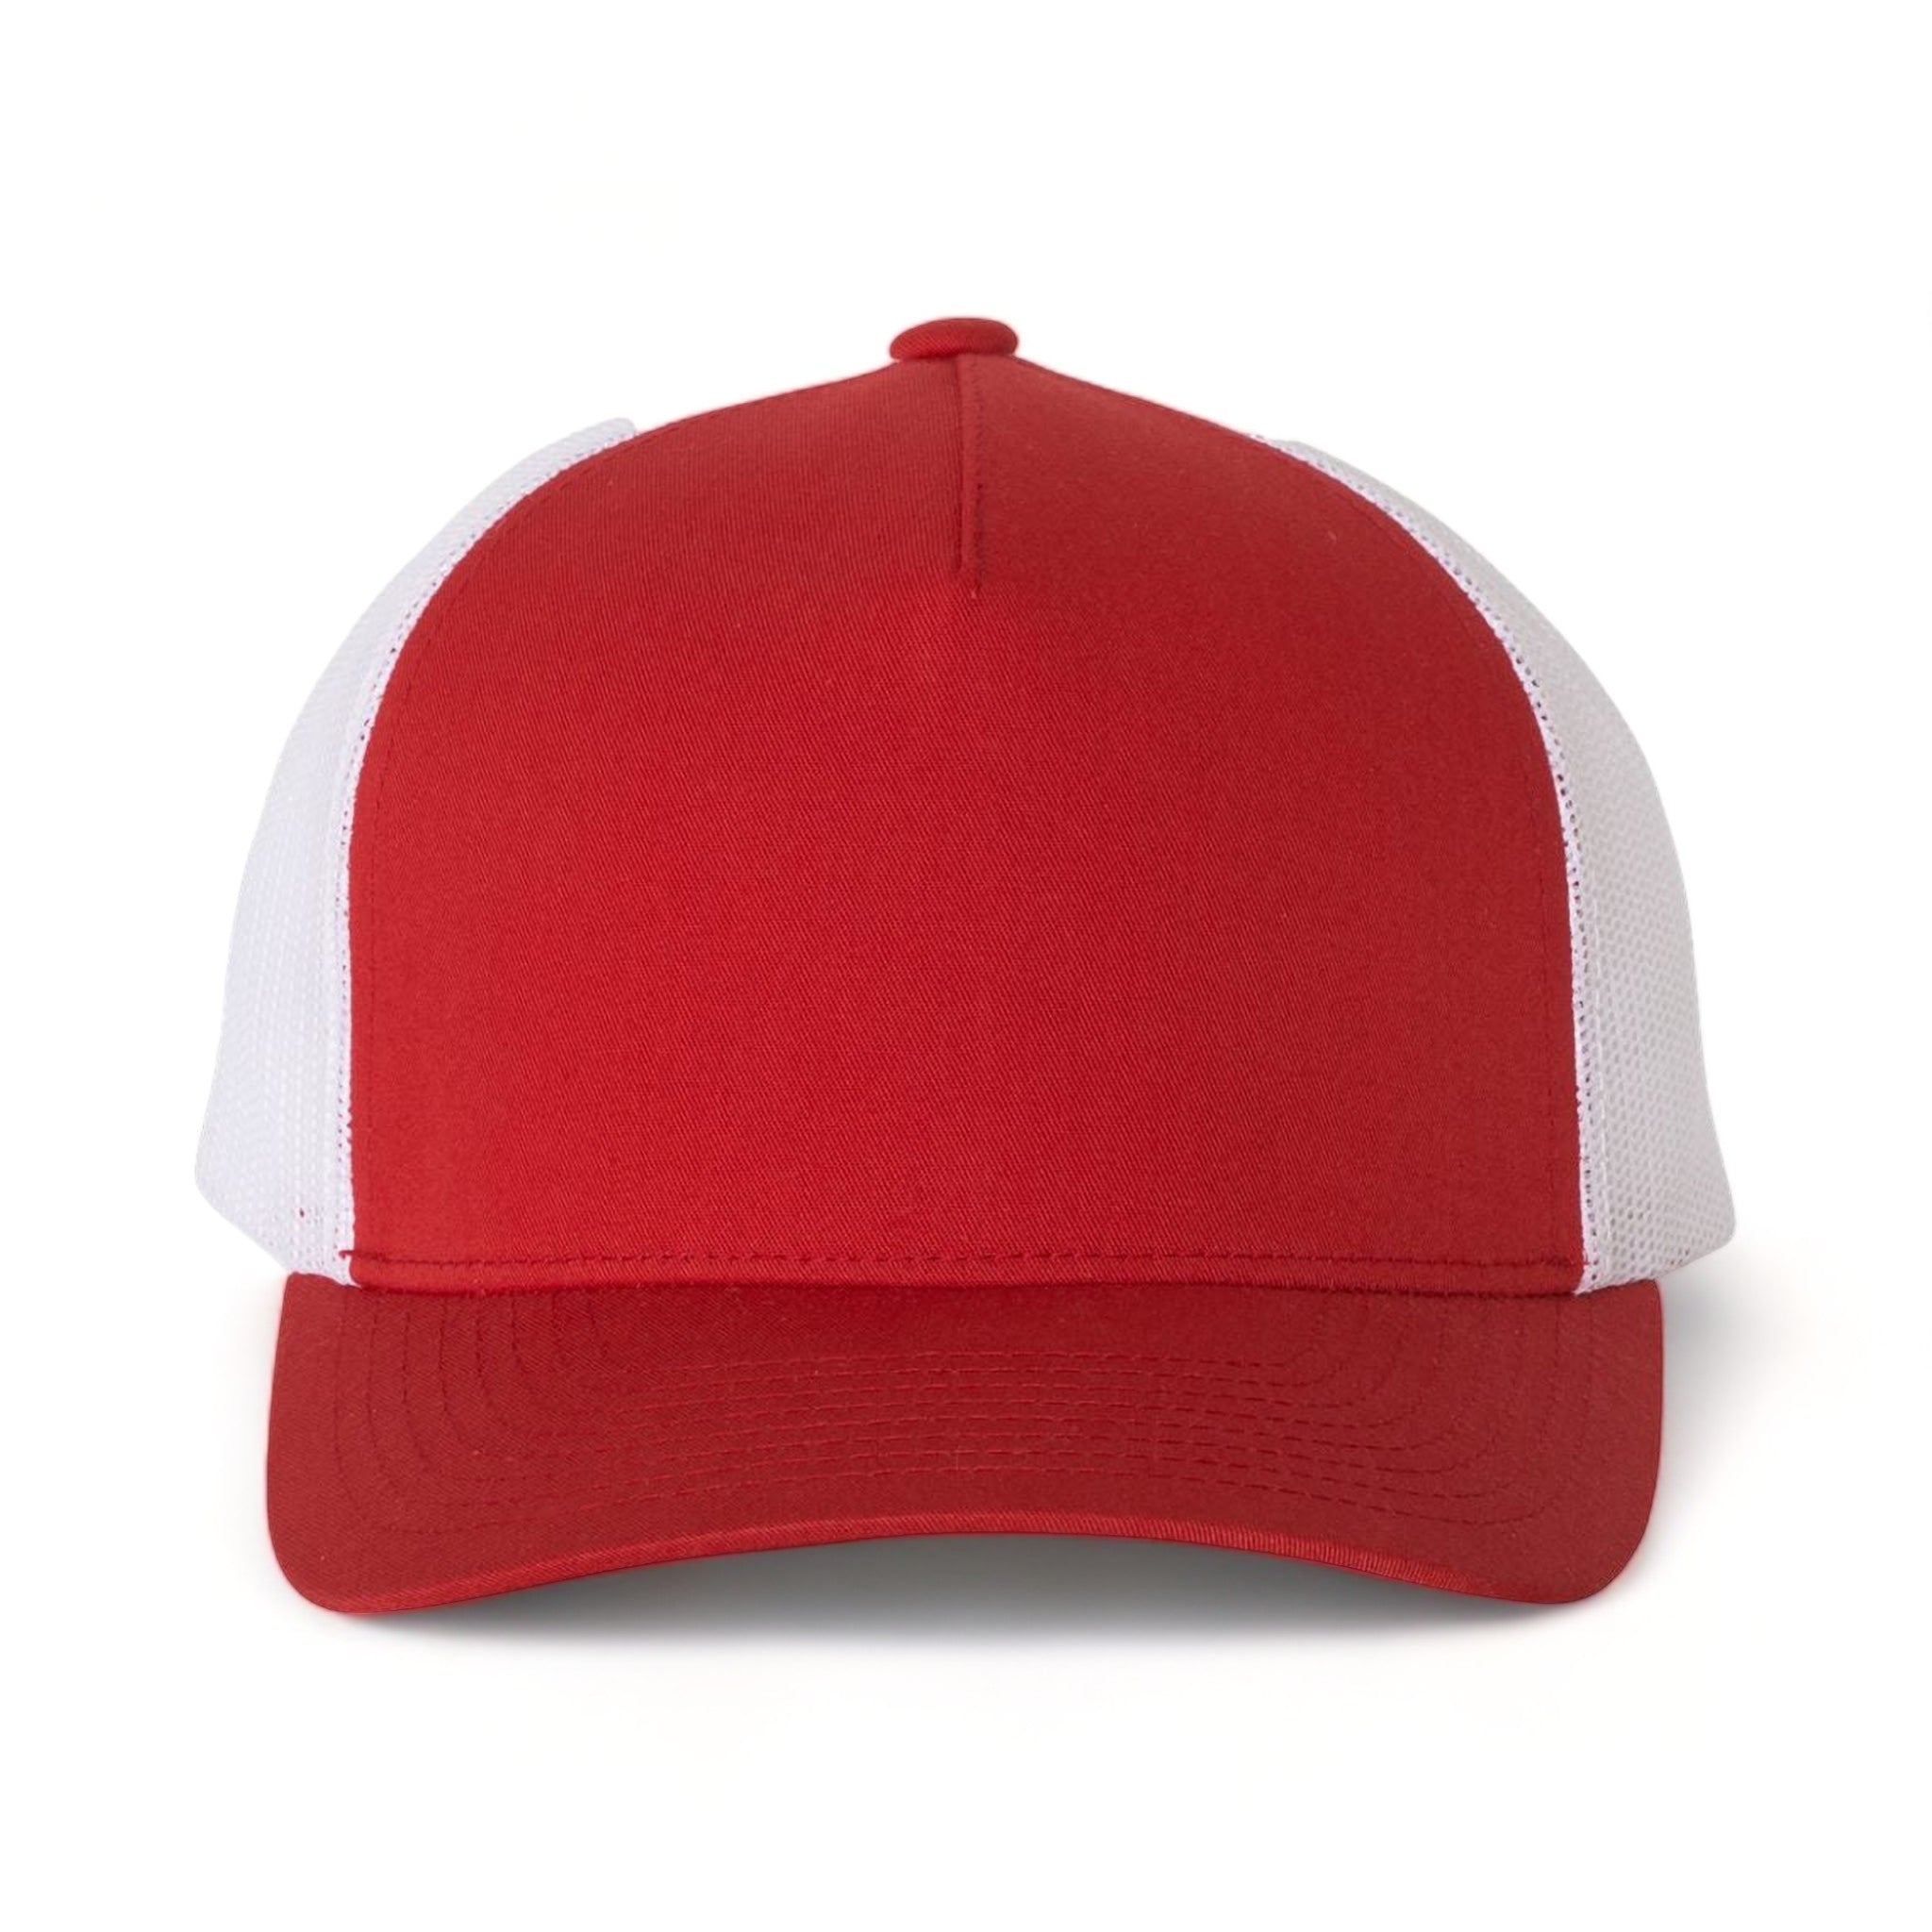 Front view of YP Classics 6506 custom hat in red and white